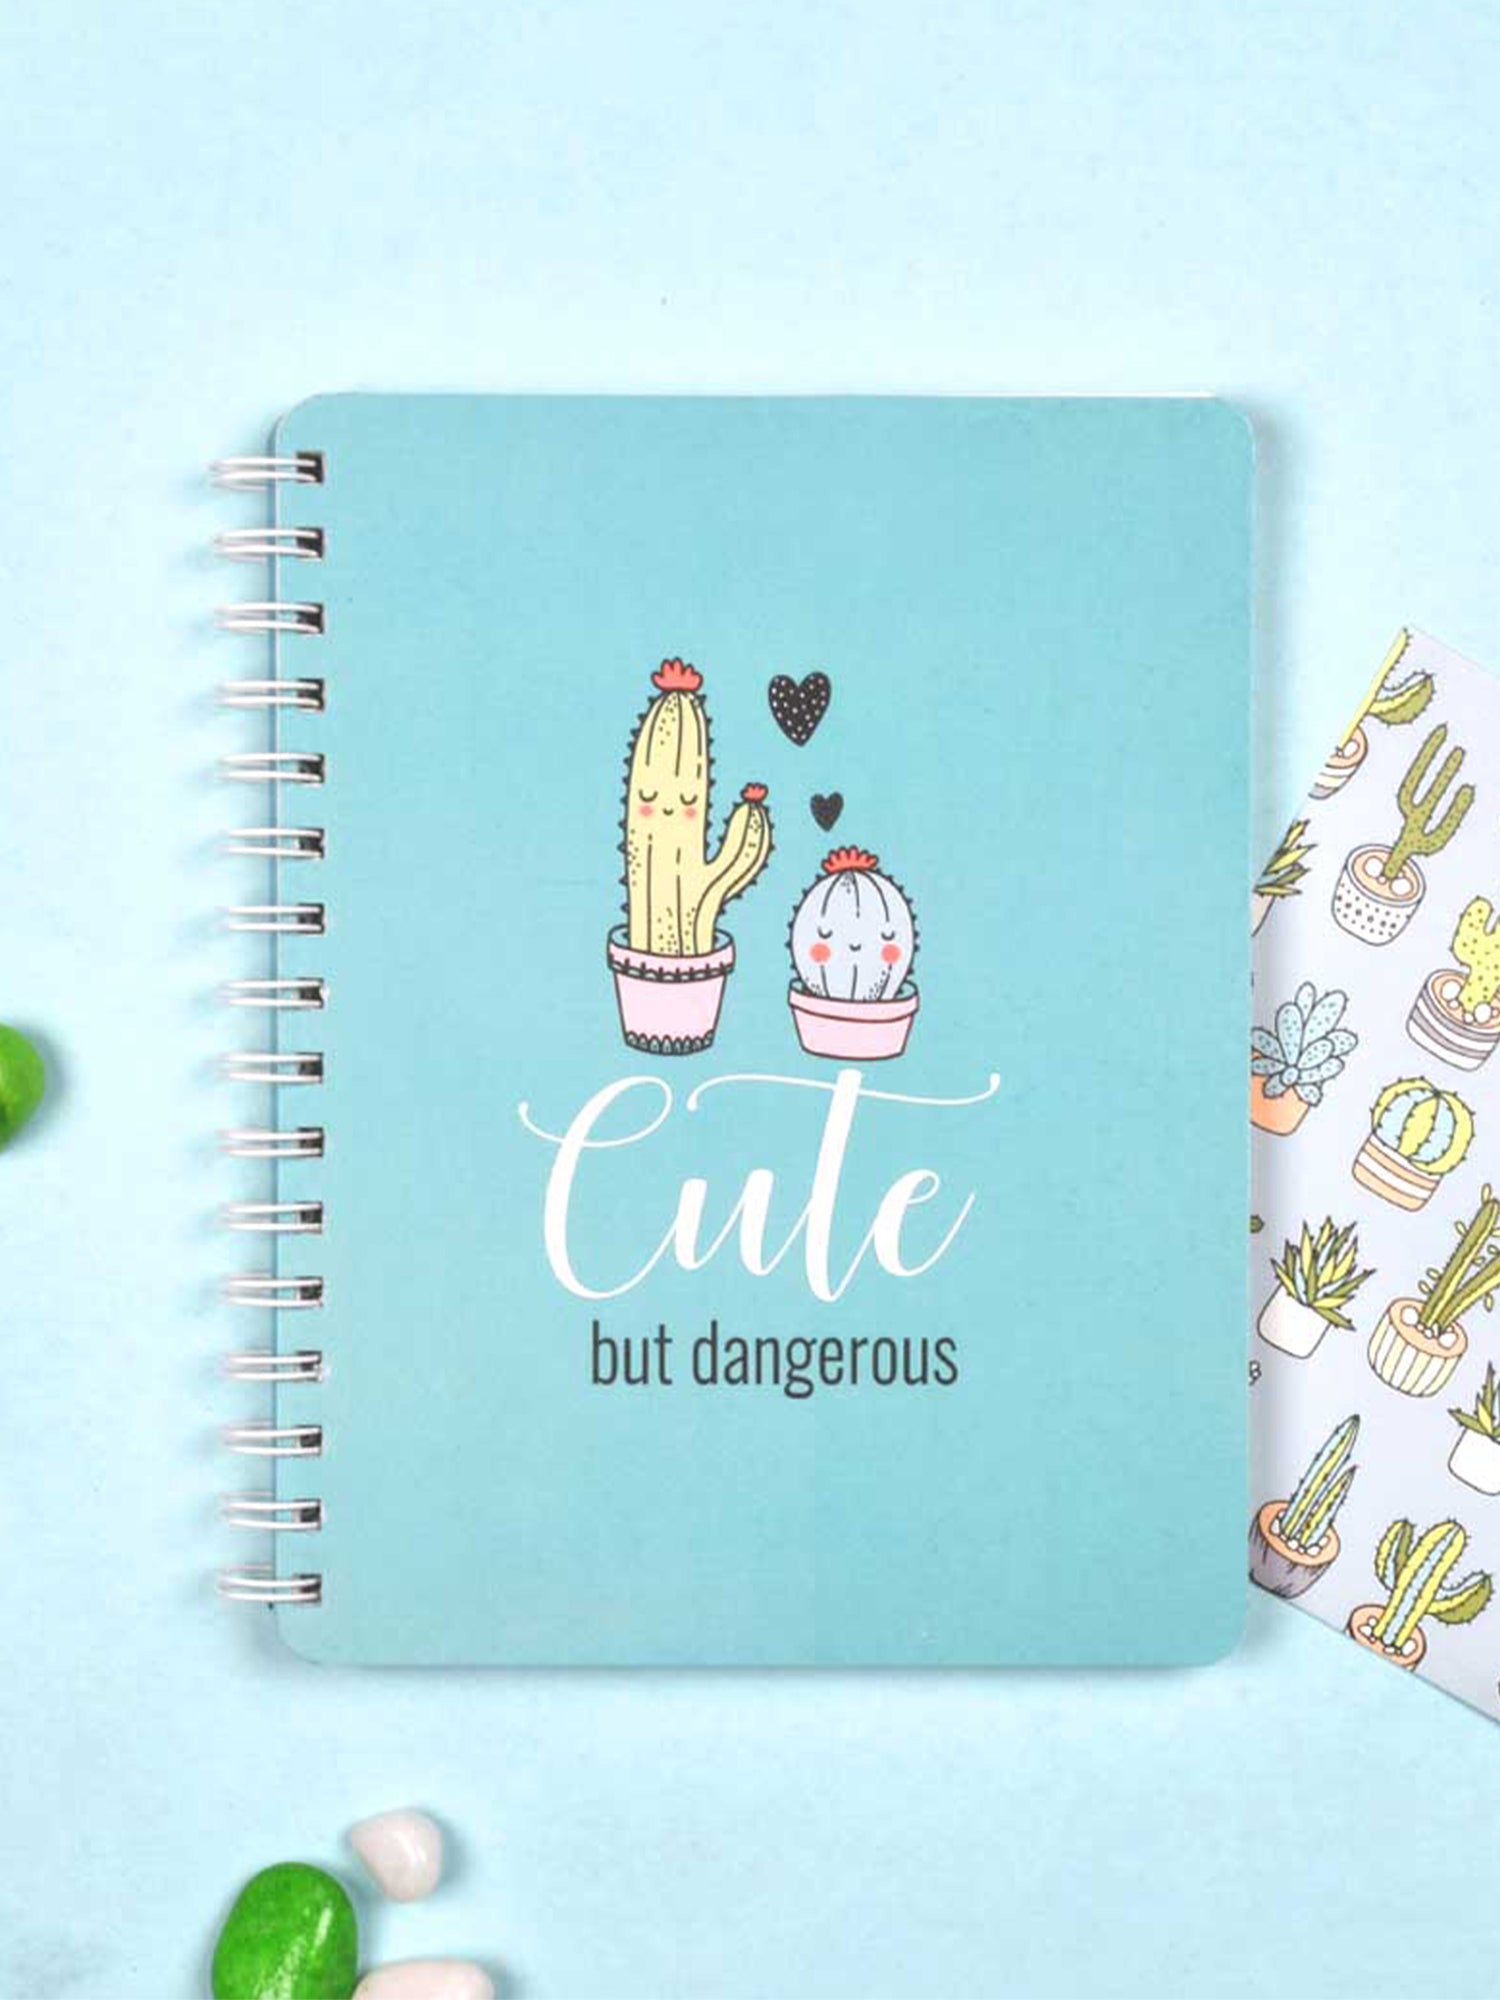 Doodle Cuteness Overload Hard Bound B5 Diary - Wiro - DoodleCollection Store